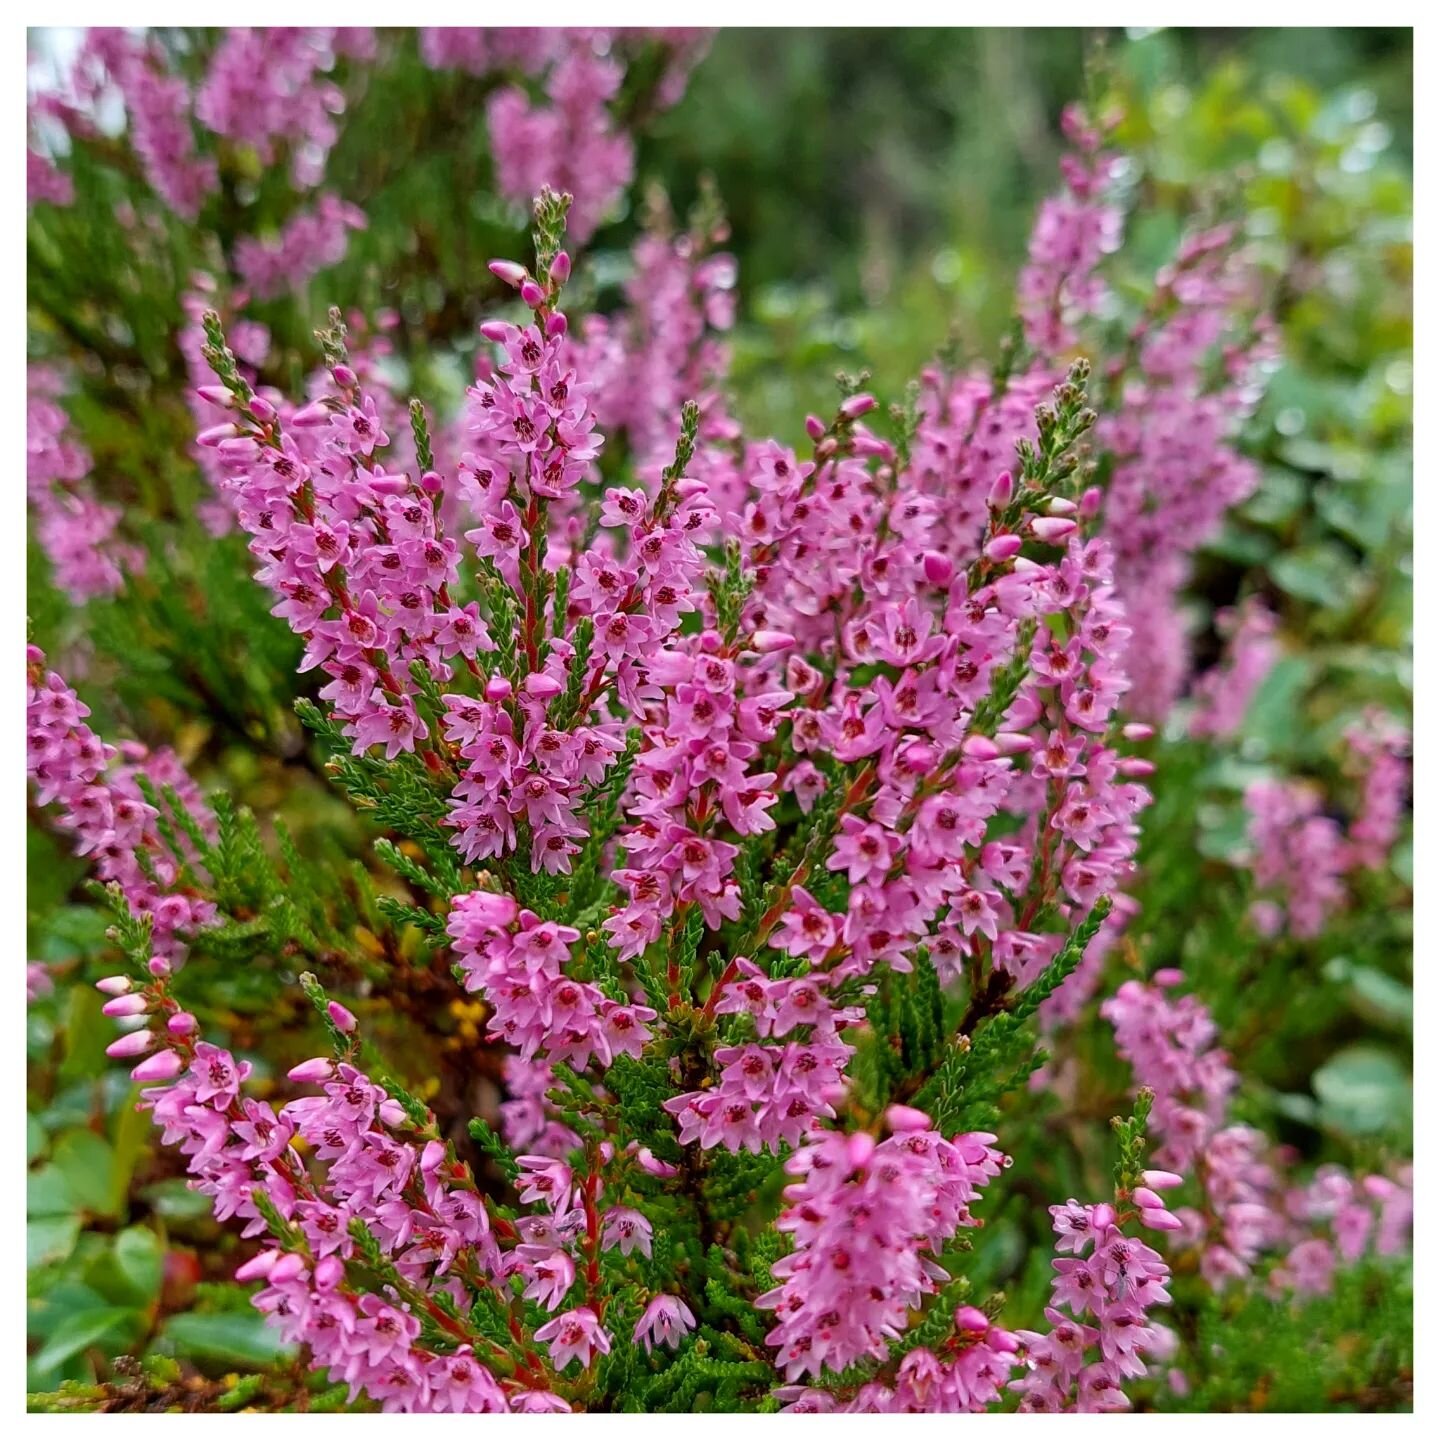 20&deg;C 🌥
Most norwegian beekeepers migrate to coastal or mountaineous heathlands in late summer. The heather bloom starts in juli and can last all the way to september, providing a late summer flow if the weather permits. Next to the june wild ras